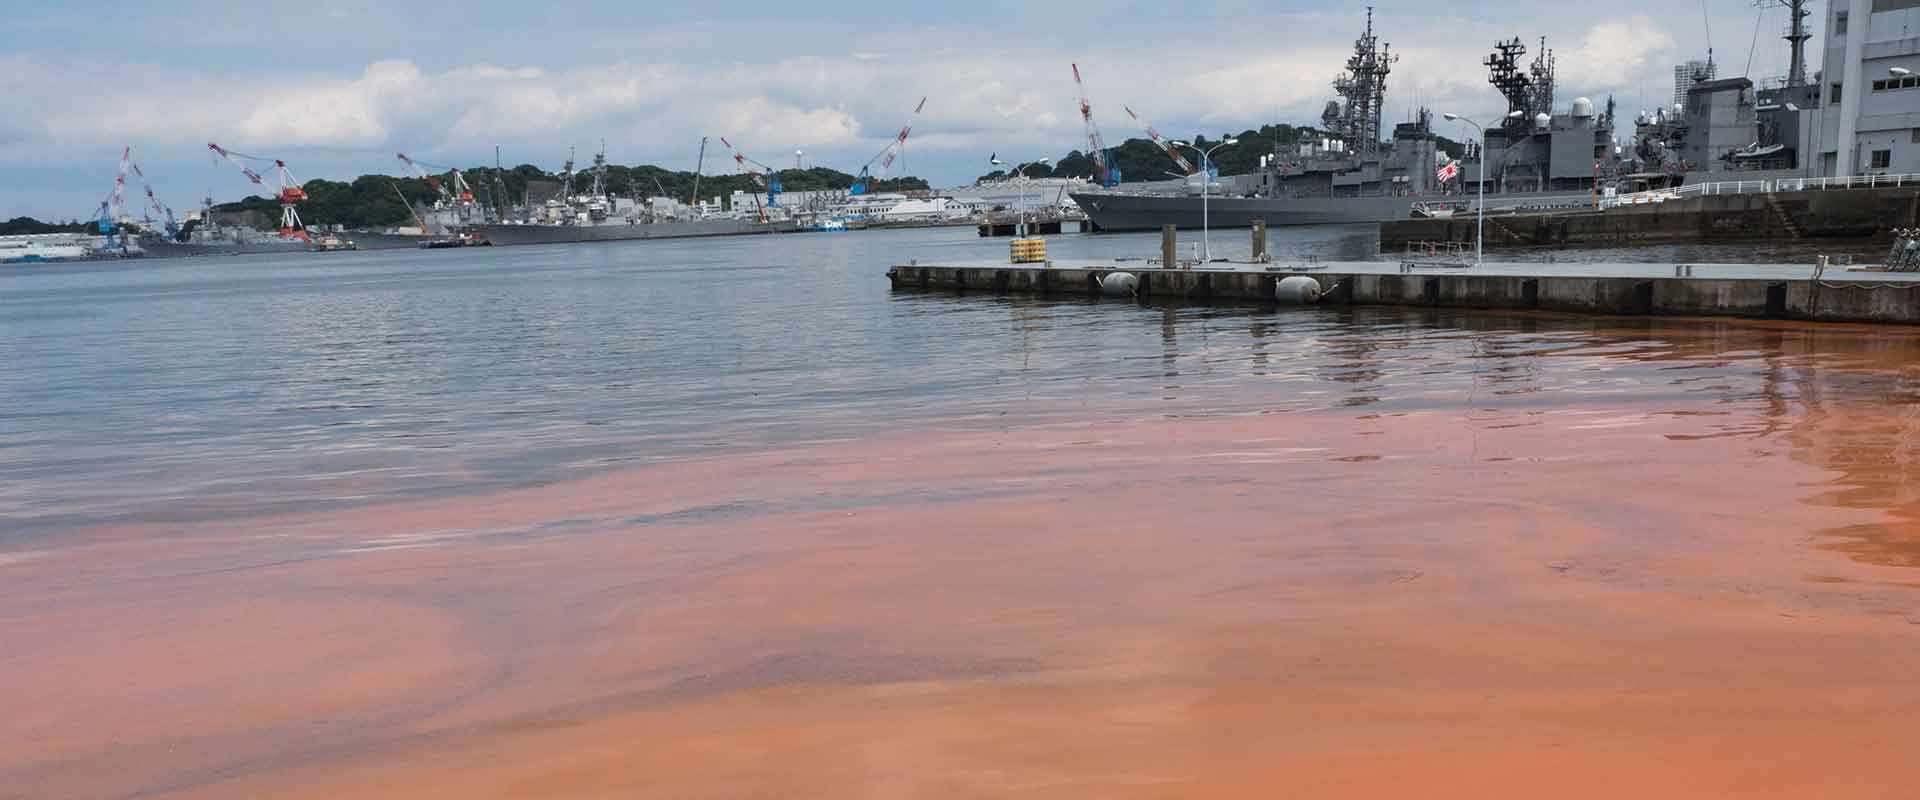 marina water choked with red tide algal bloom